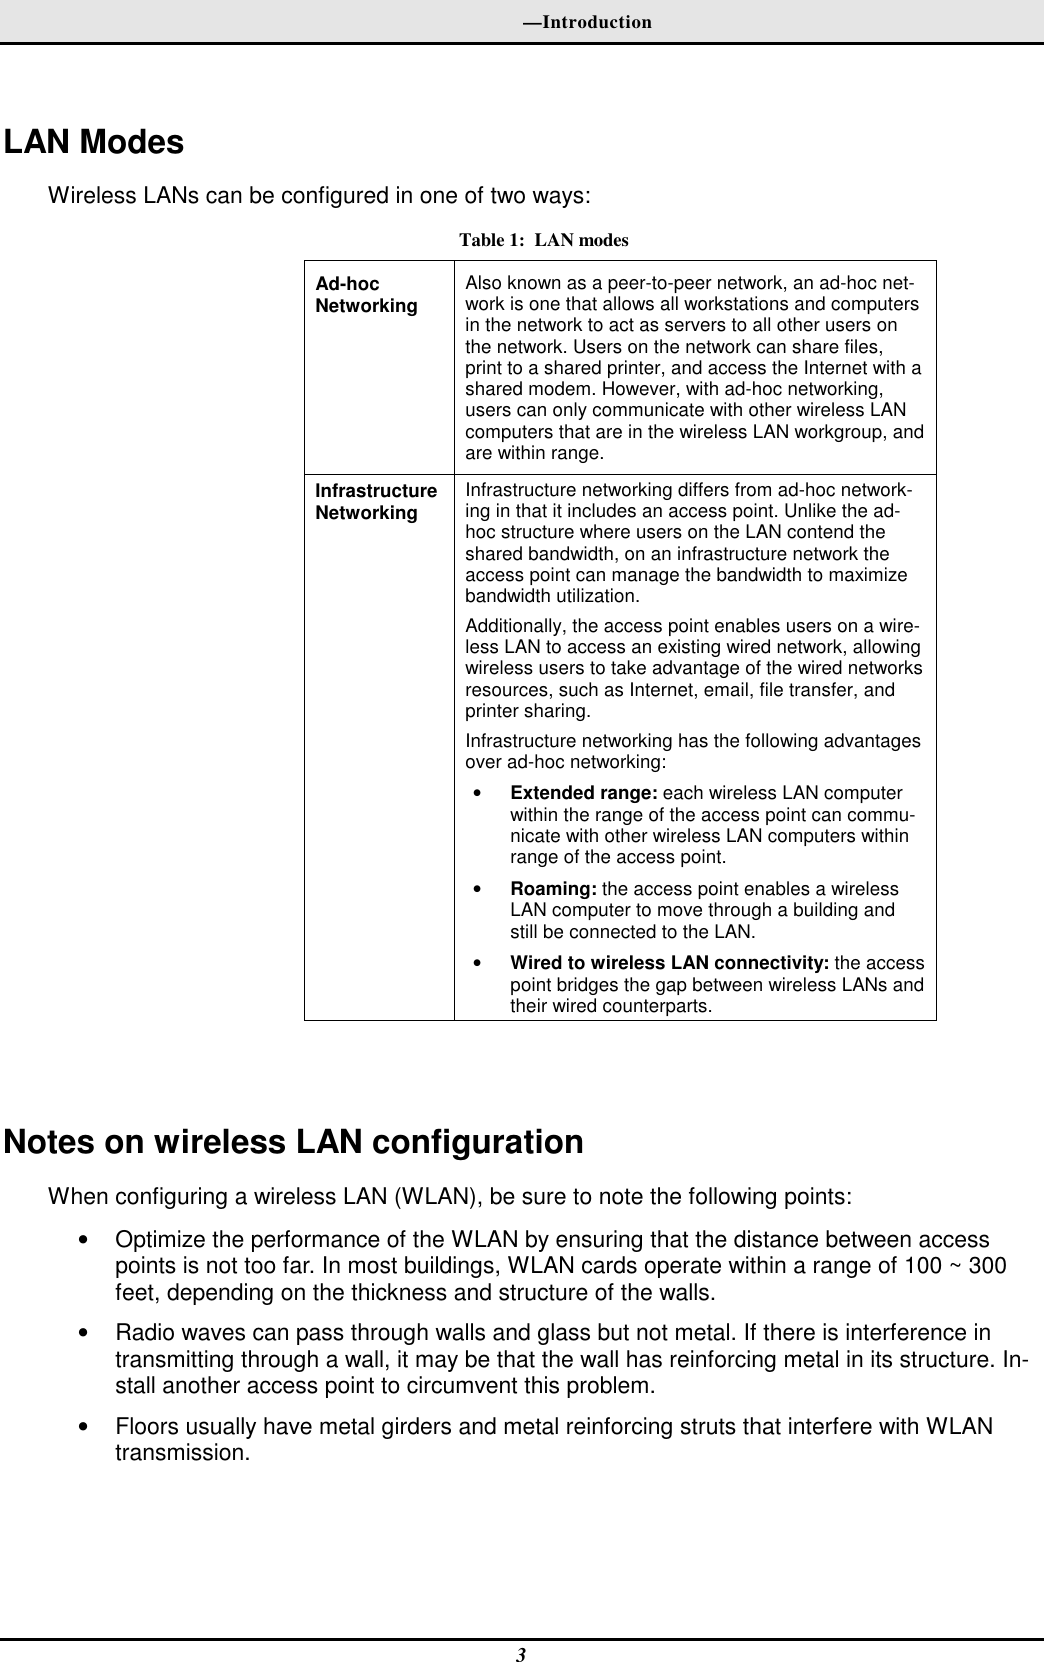   —Introduction 3  LAN Modes Wireless LANs can be configured in one of two ways: Table 1:  LAN modes Ad-hoc  Networking  Also known as a peer-to-peer network, an ad-hoc net-work is one that allows all workstations and computers in the network to act as servers to all other users on the network. Users on the network can share files, print to a shared printer, and access the Internet with a shared modem. However, with ad-hoc networking, users can only communicate with other wireless LAN computers that are in the wireless LAN workgroup, and are within range. Infrastructure Networking  Infrastructure networking differs from ad-hoc network-ing in that it includes an access point. Unlike the ad-hoc structure where users on the LAN contend the shared bandwidth, on an infrastructure network the access point can manage the bandwidth to maximize bandwidth utilization.  Additionally, the access point enables users on a wire-less LAN to access an existing wired network, allowing wireless users to take advantage of the wired networks resources, such as Internet, email, file transfer, and printer sharing.  Infrastructure networking has the following advantages over ad-hoc networking: • Extended range: each wireless LAN computer within the range of the access point can commu-nicate with other wireless LAN computers within range of the access point. • Roaming: the access point enables a wireless LAN computer to move through a building and still be connected to the LAN. • Wired to wireless LAN connectivity: the access point bridges the gap between wireless LANs and their wired counterparts.   Notes on wireless LAN configuration When configuring a wireless LAN (WLAN), be sure to note the following points: •  Optimize the performance of the WLAN by ensuring that the distance between access points is not too far. In most buildings, WLAN cards operate within a range of 100 ~ 300 feet, depending on the thickness and structure of the walls.  •  Radio waves can pass through walls and glass but not metal. If there is interference in transmitting through a wall, it may be that the wall has reinforcing metal in its structure. In-stall another access point to circumvent this problem. •  Floors usually have metal girders and metal reinforcing struts that interfere with WLAN transmission. 